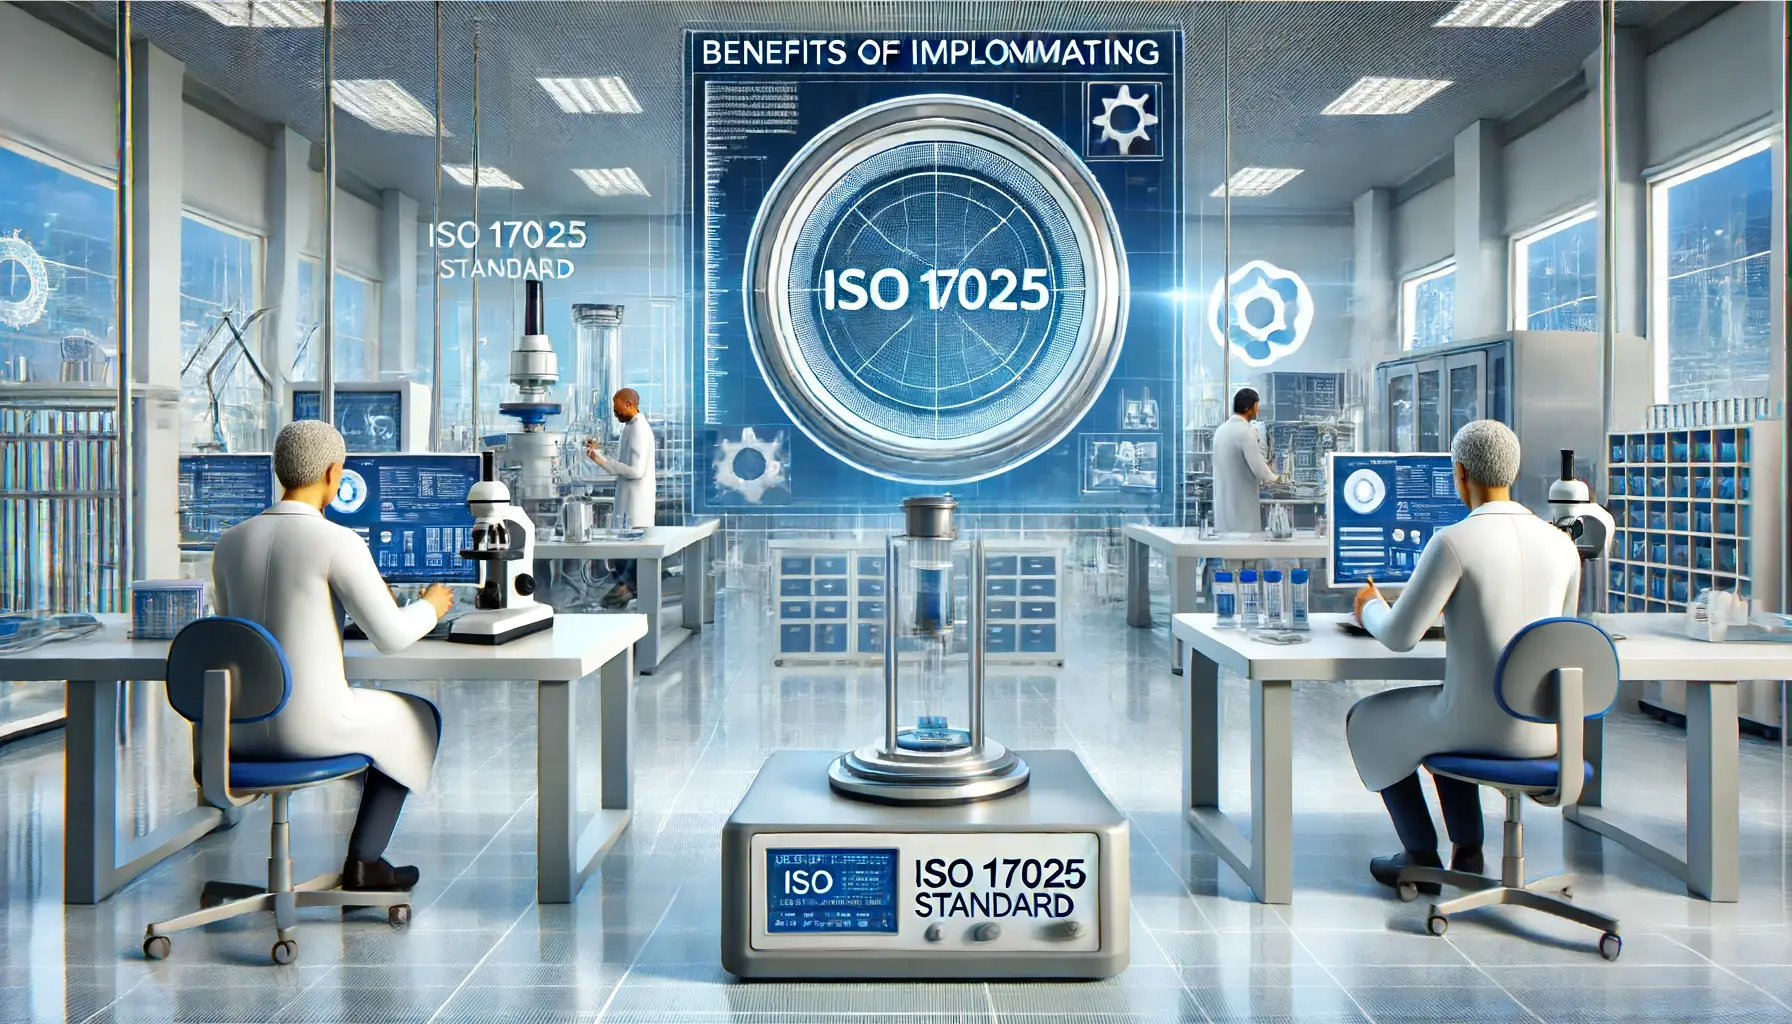 What are the Benefits of Implementing ISO 17025 Standard